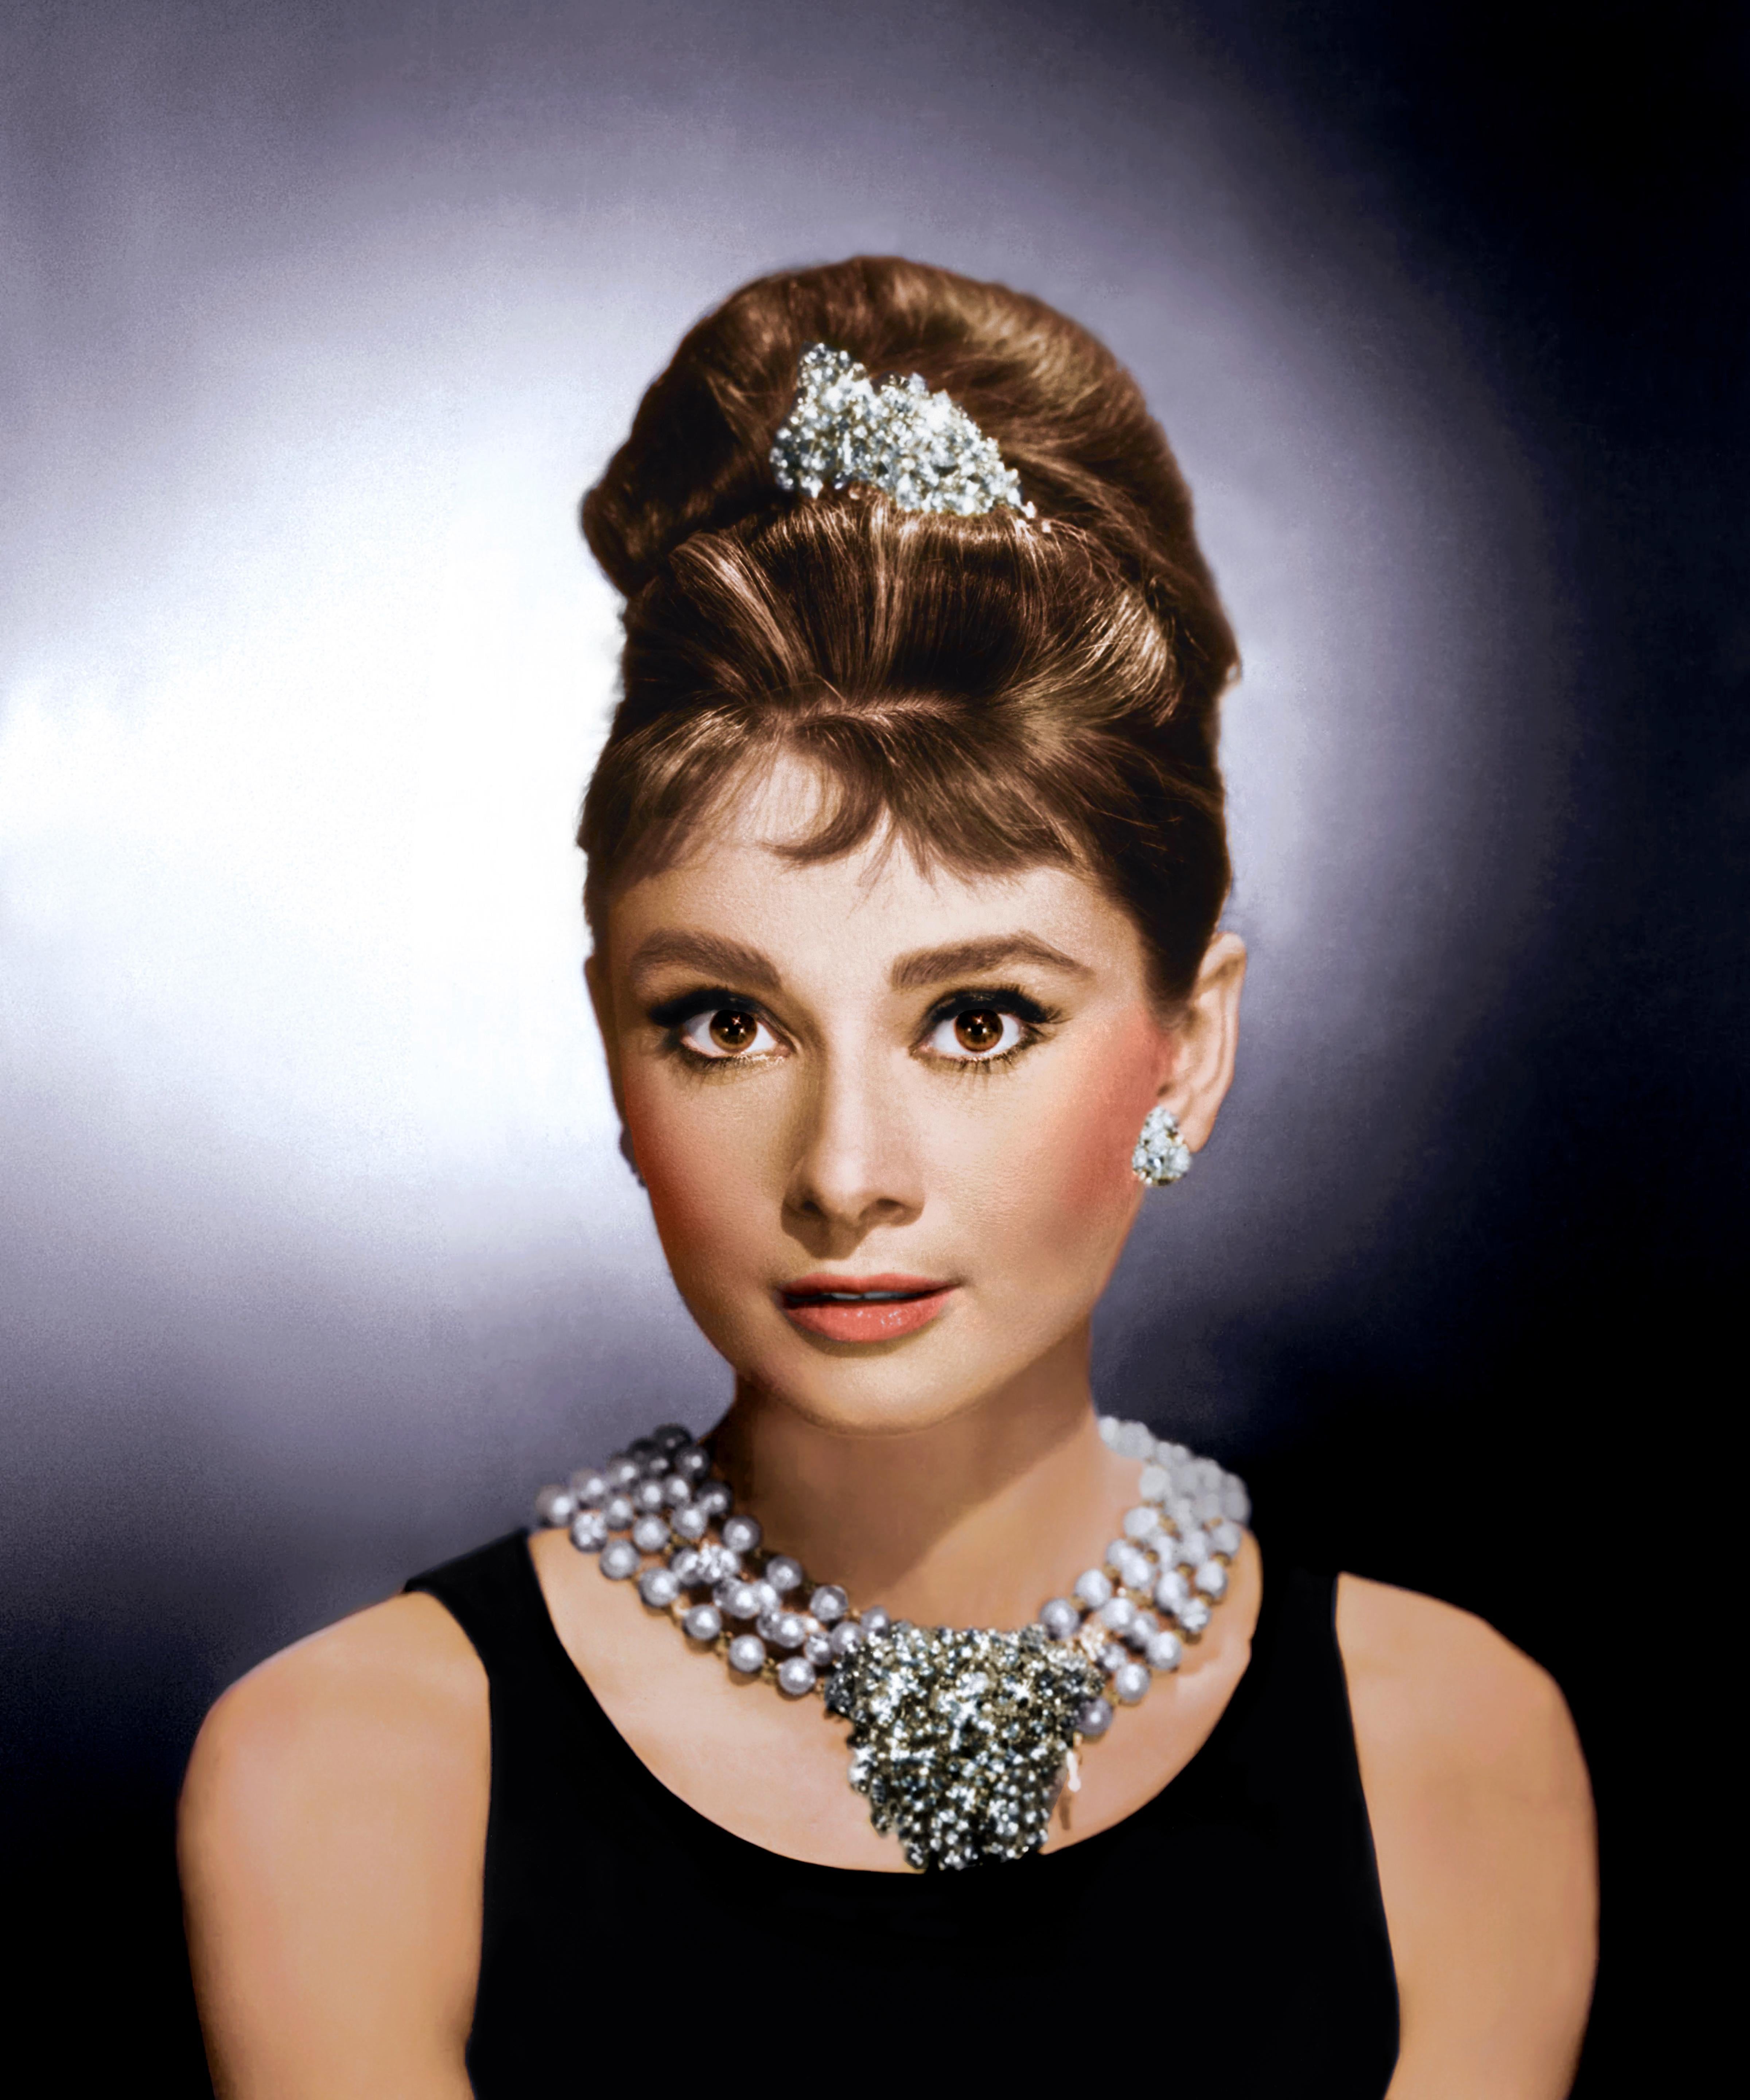 Unknown Color Photograph - Audrey Hepburn "Breakfast at Tiffany's"  Colorized Fine Art Print